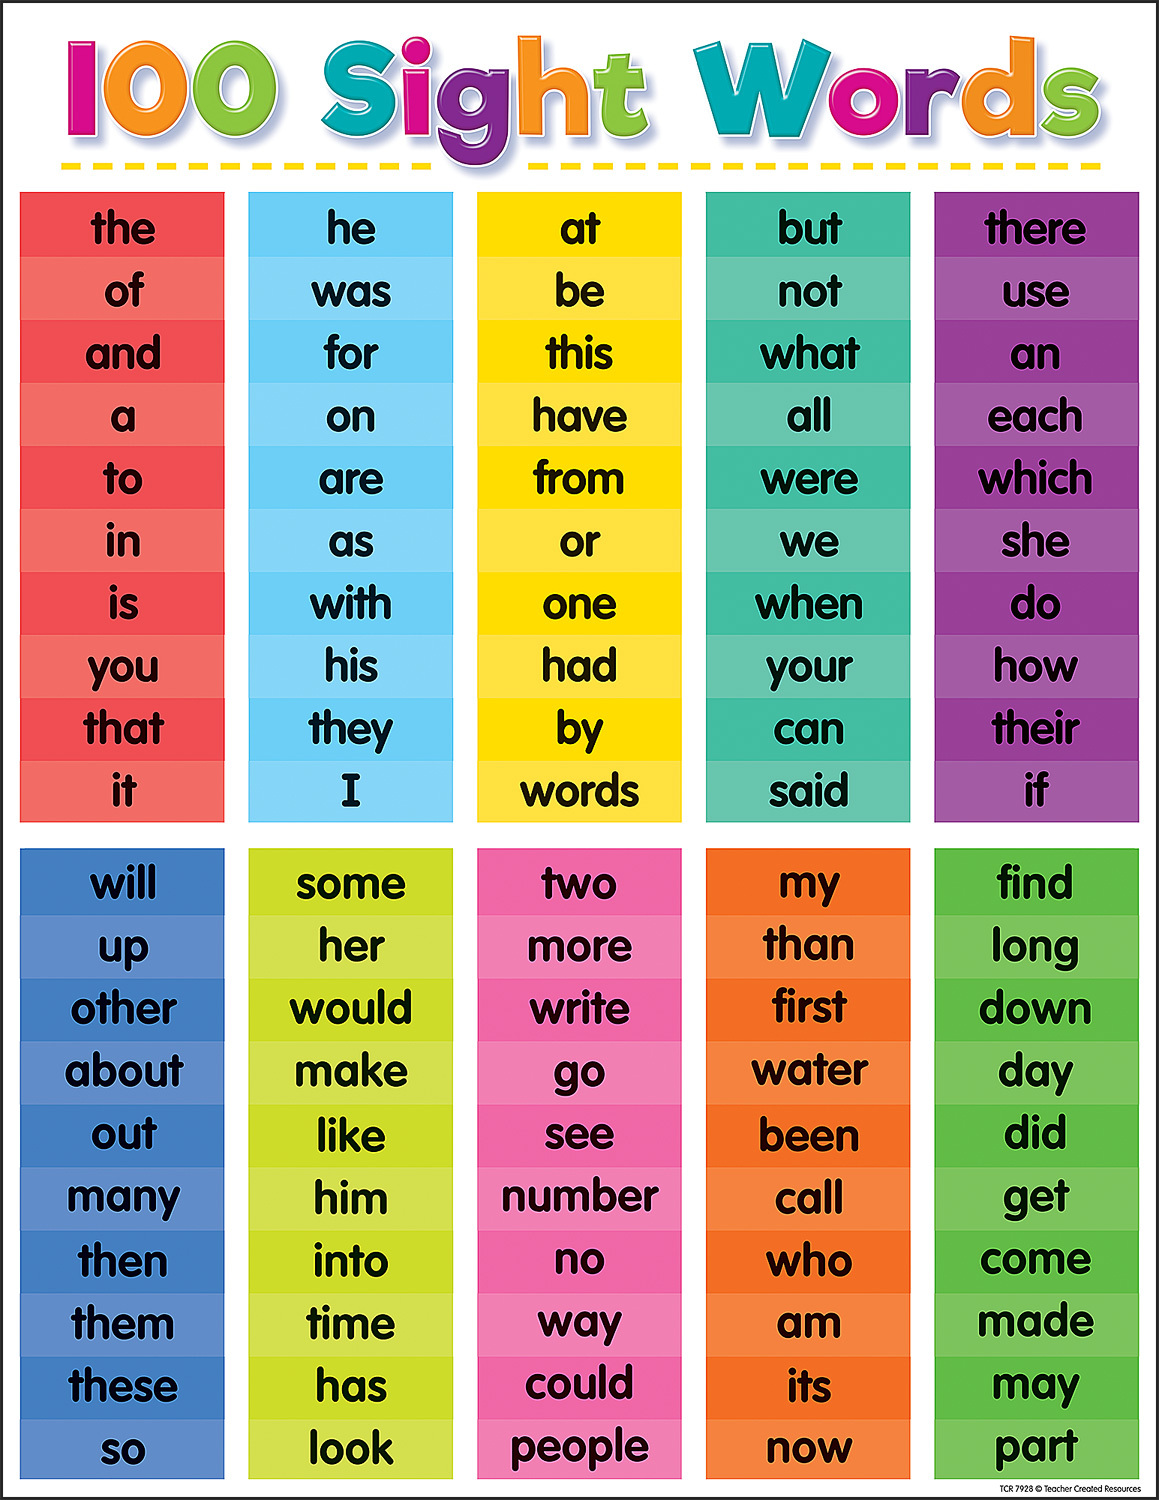 colorful-100-sight-words-chart-givens-books-and-little-dickens